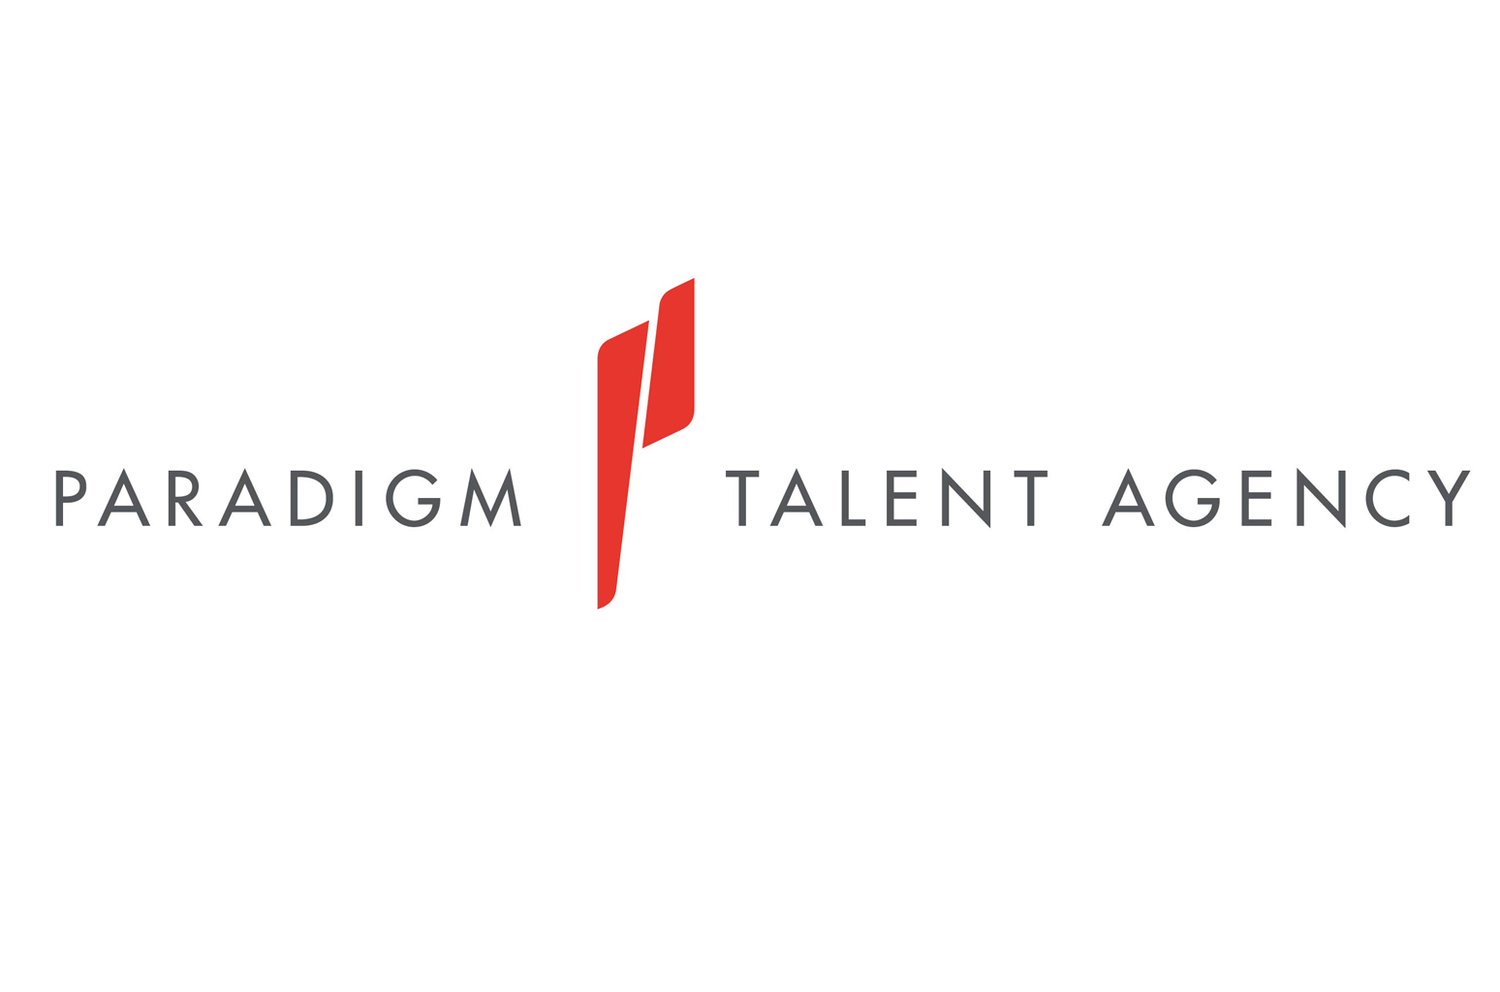 Paradigm Talent Agency Makes Major Cuts As Touring Takes Major Hit During COVID-19 Pandemic